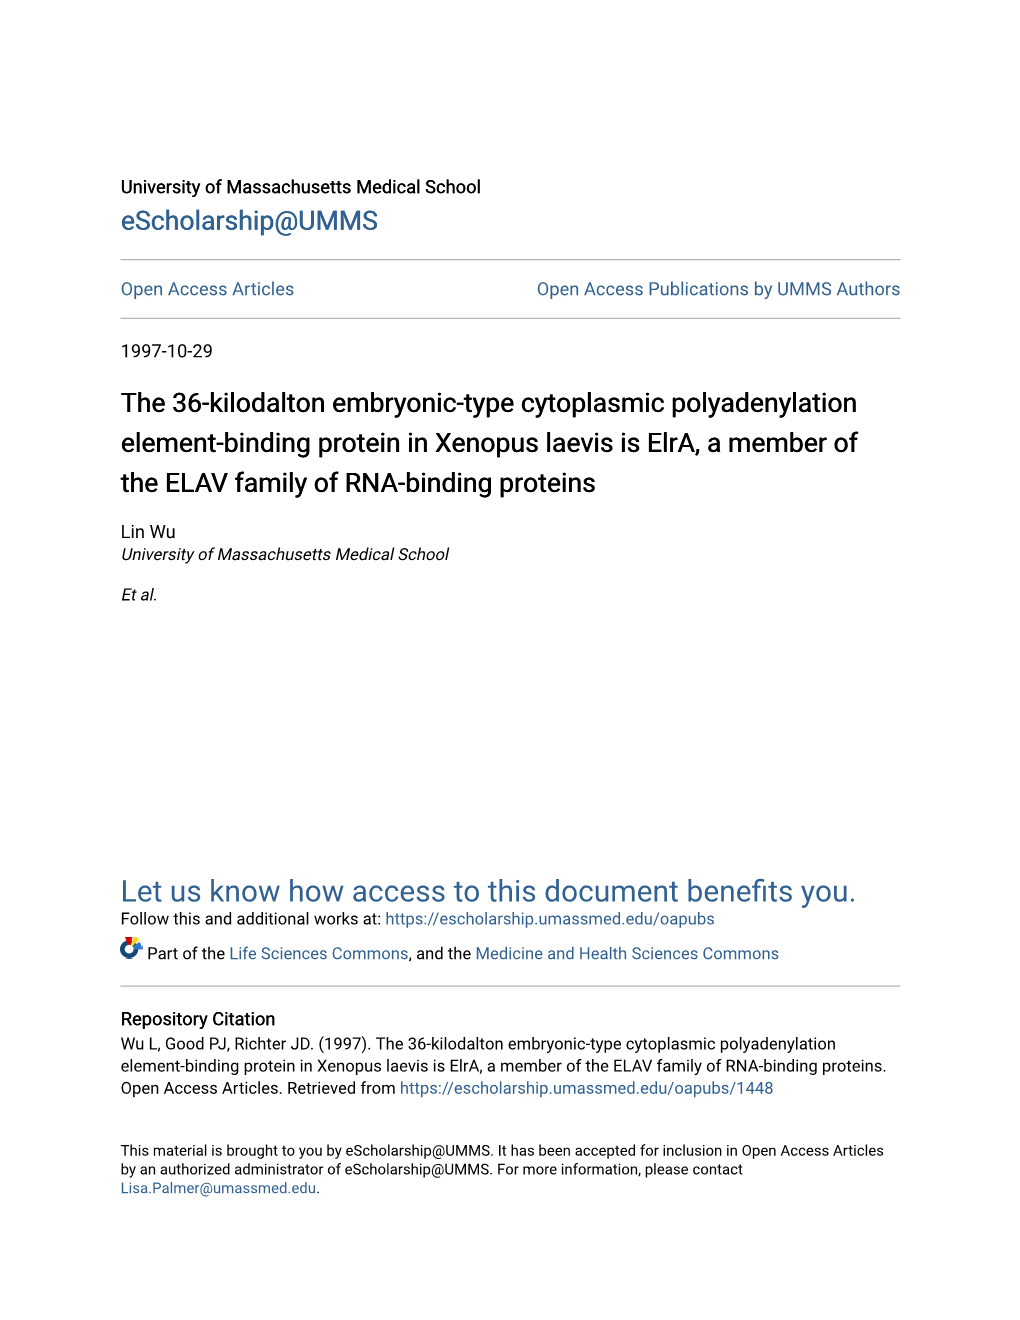 The 36-Kilodalton Embryonic-Type Cytoplasmic Polyadenylation Element-Binding Protein in Xenopus Laevis Is Elra, a Member of the ELAV Family of RNA-Binding Proteins